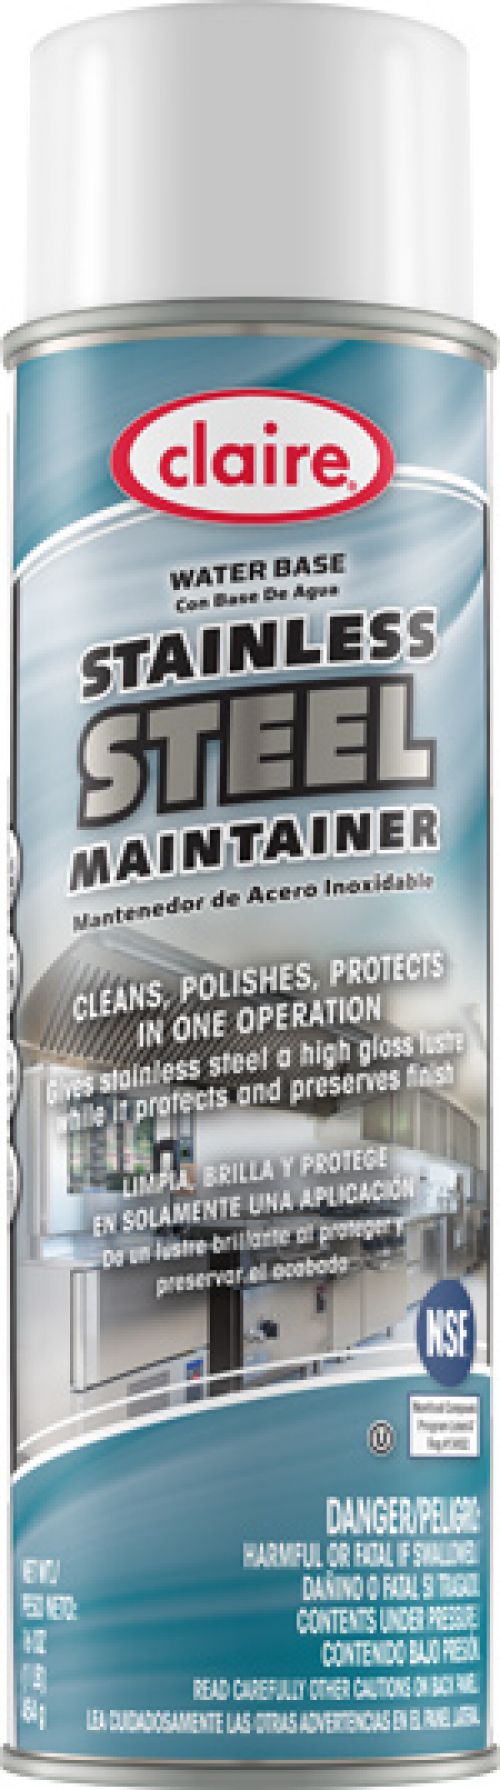 Stainless Steel Maintainer (water